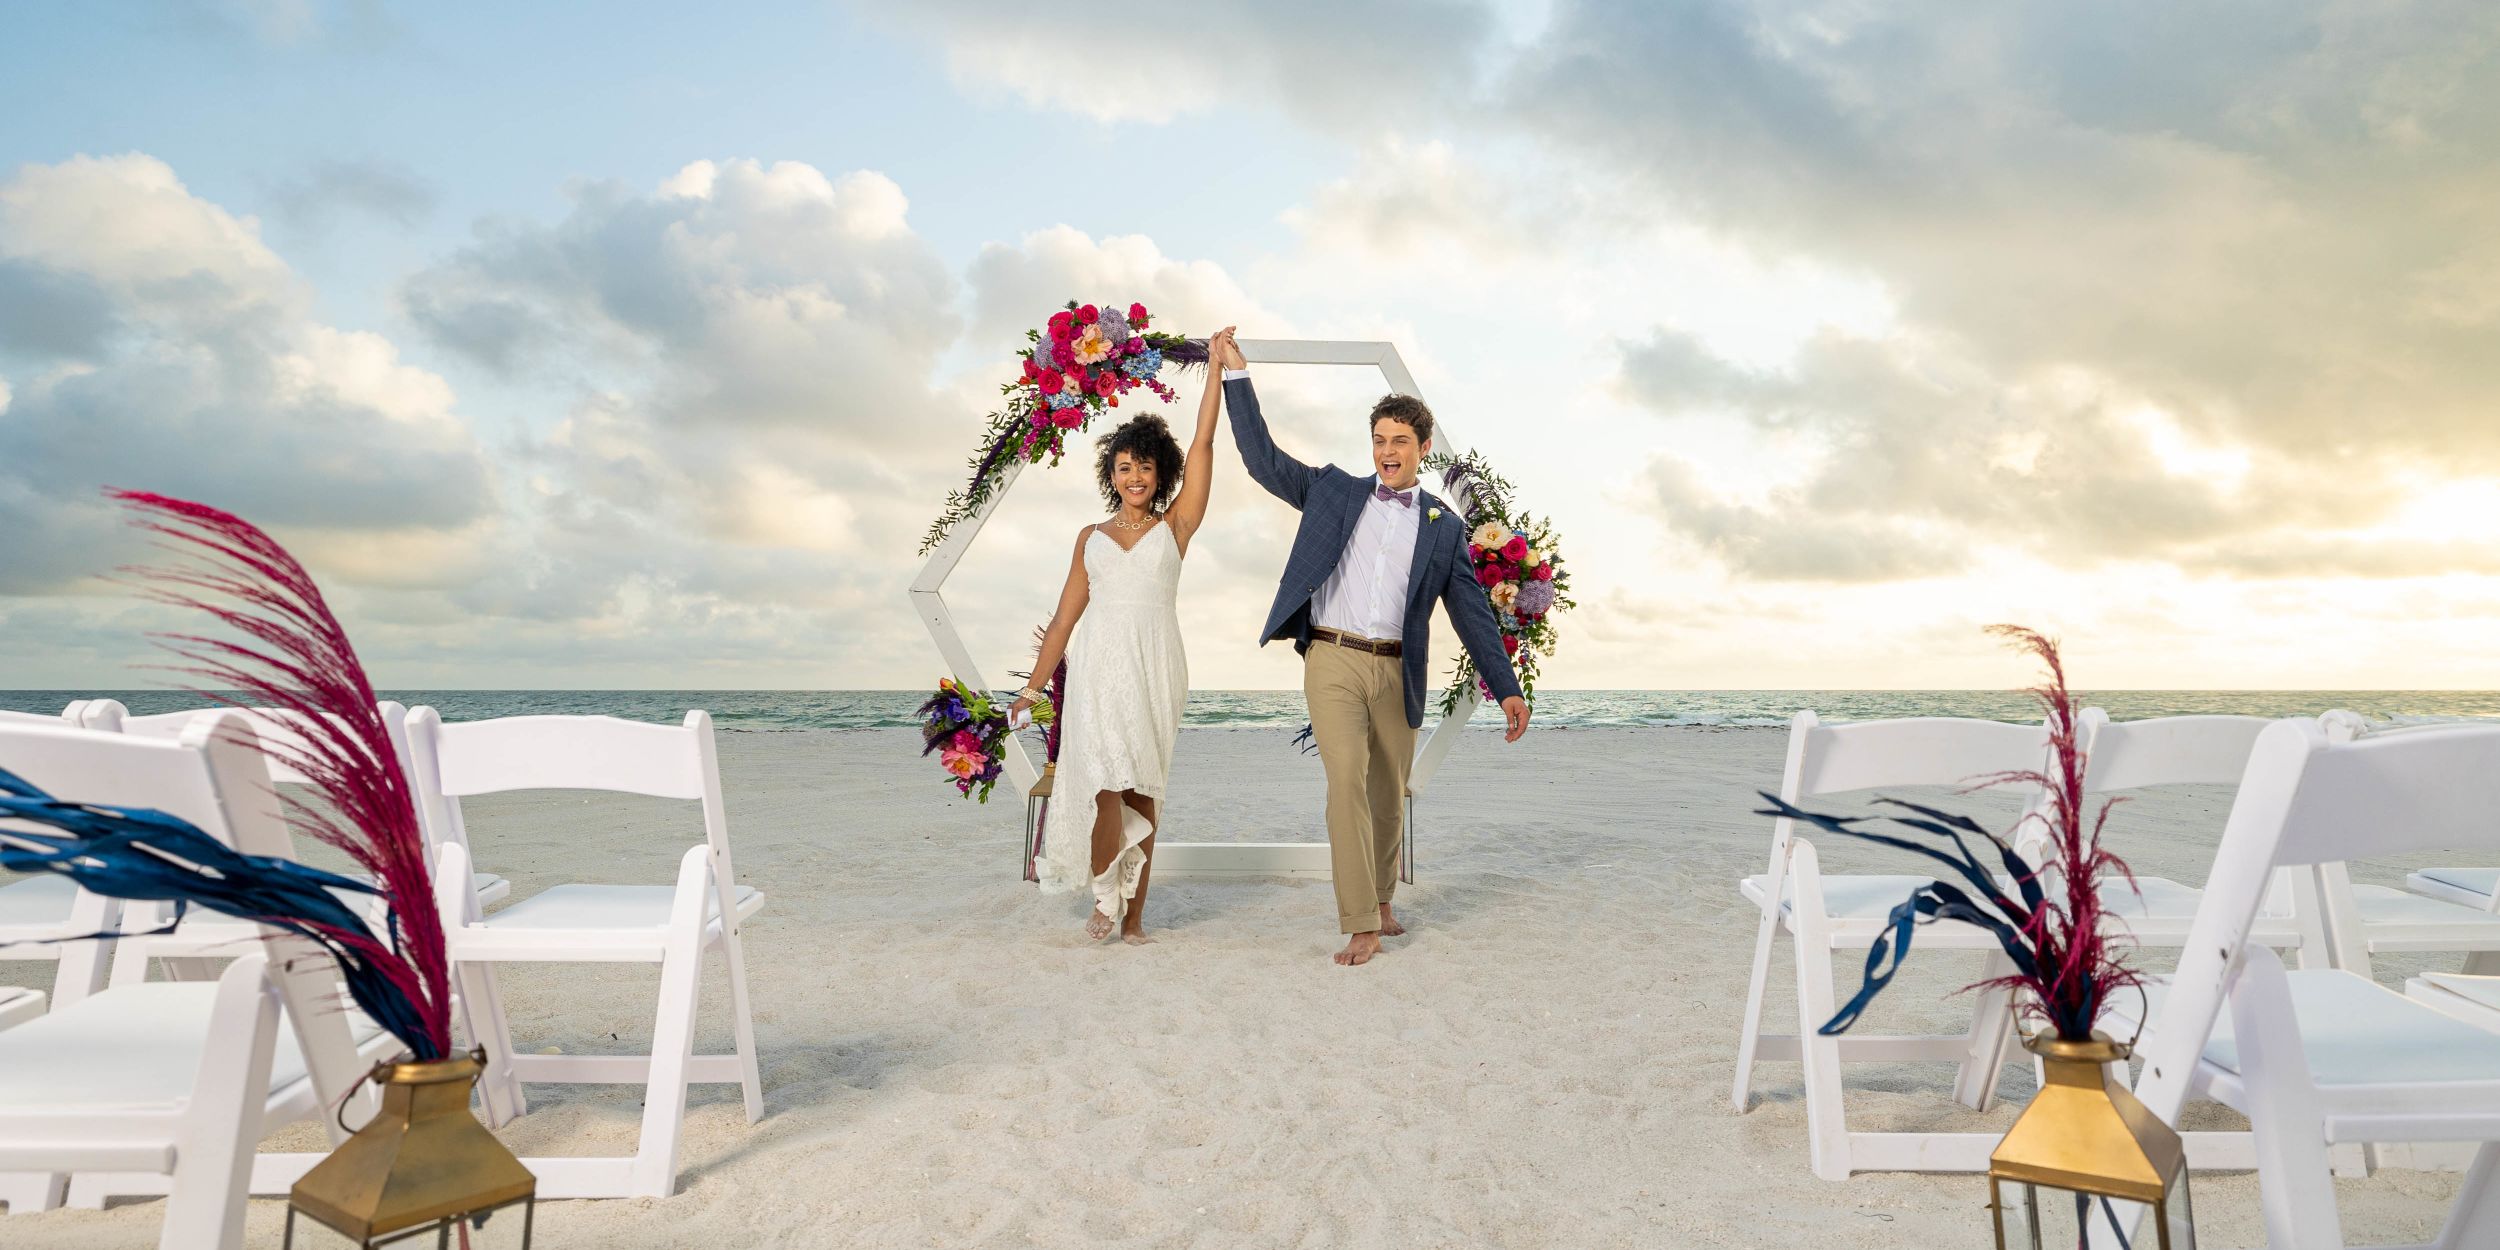 A Man And Woman Holding Flowers On A Beach